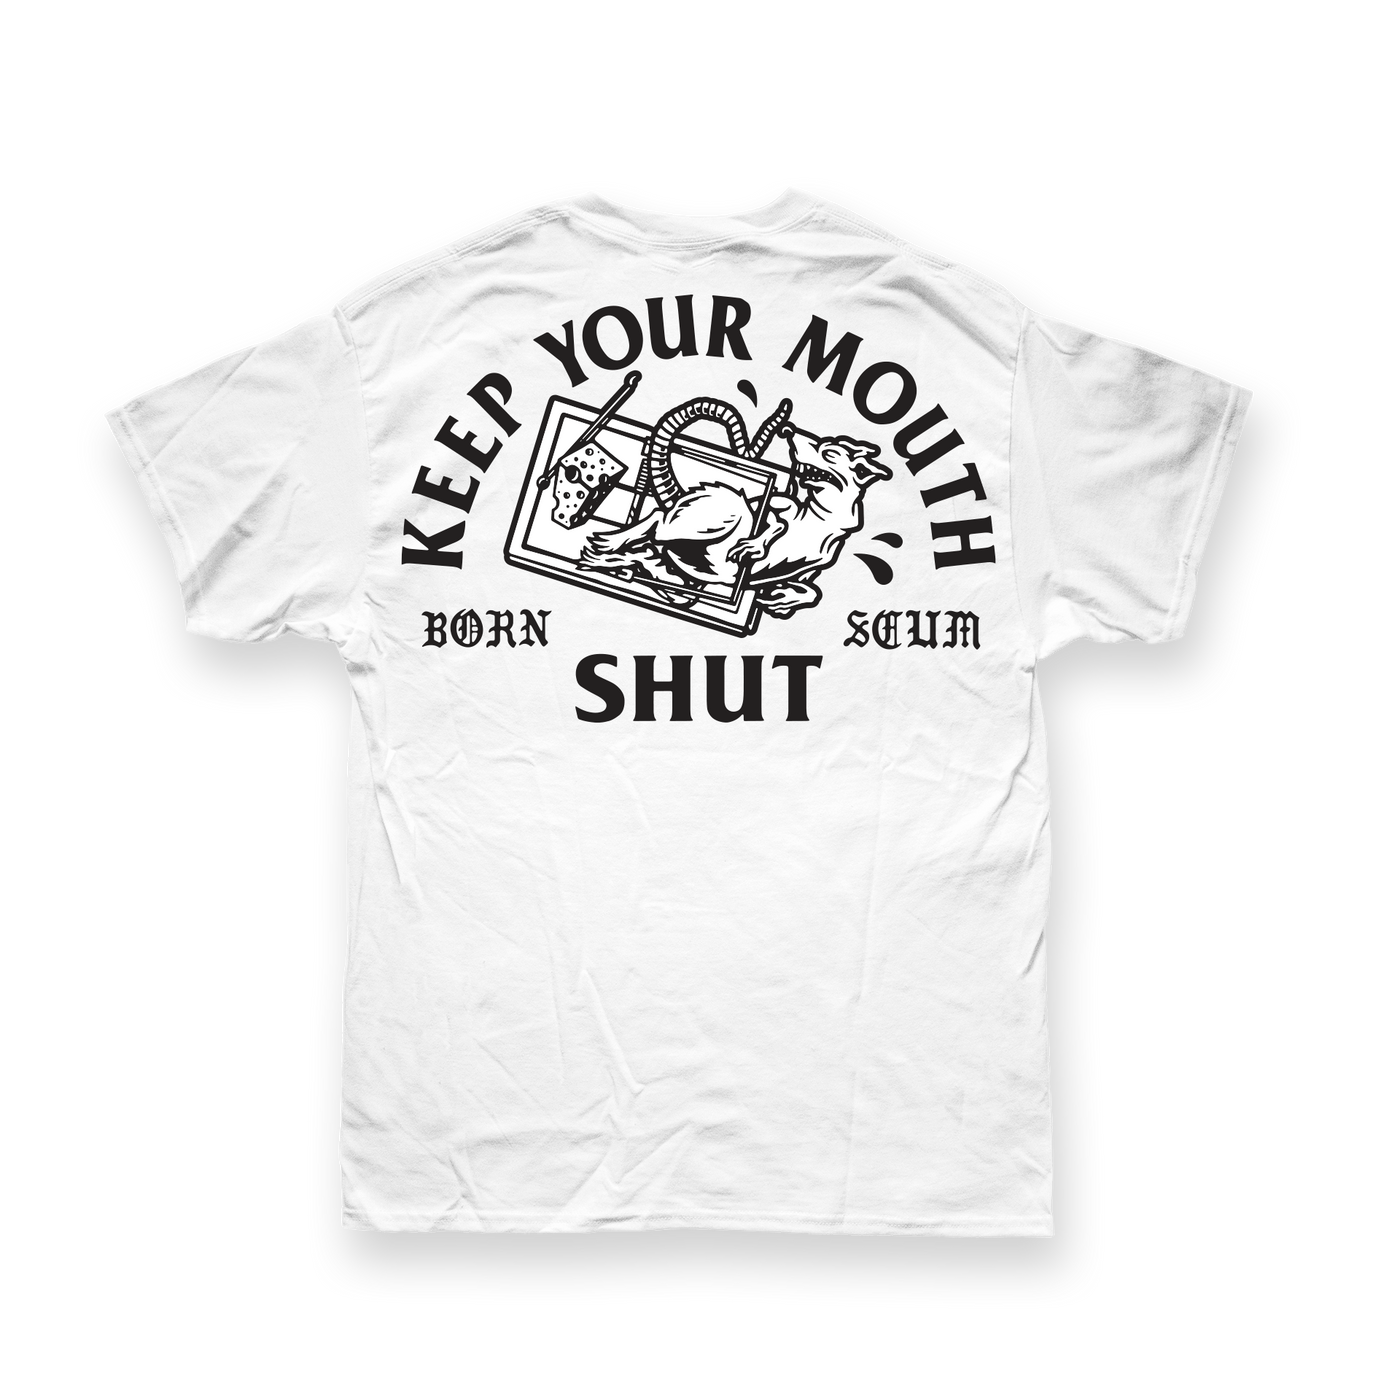 Keep Your Mouth Shut Limited T-Shirt